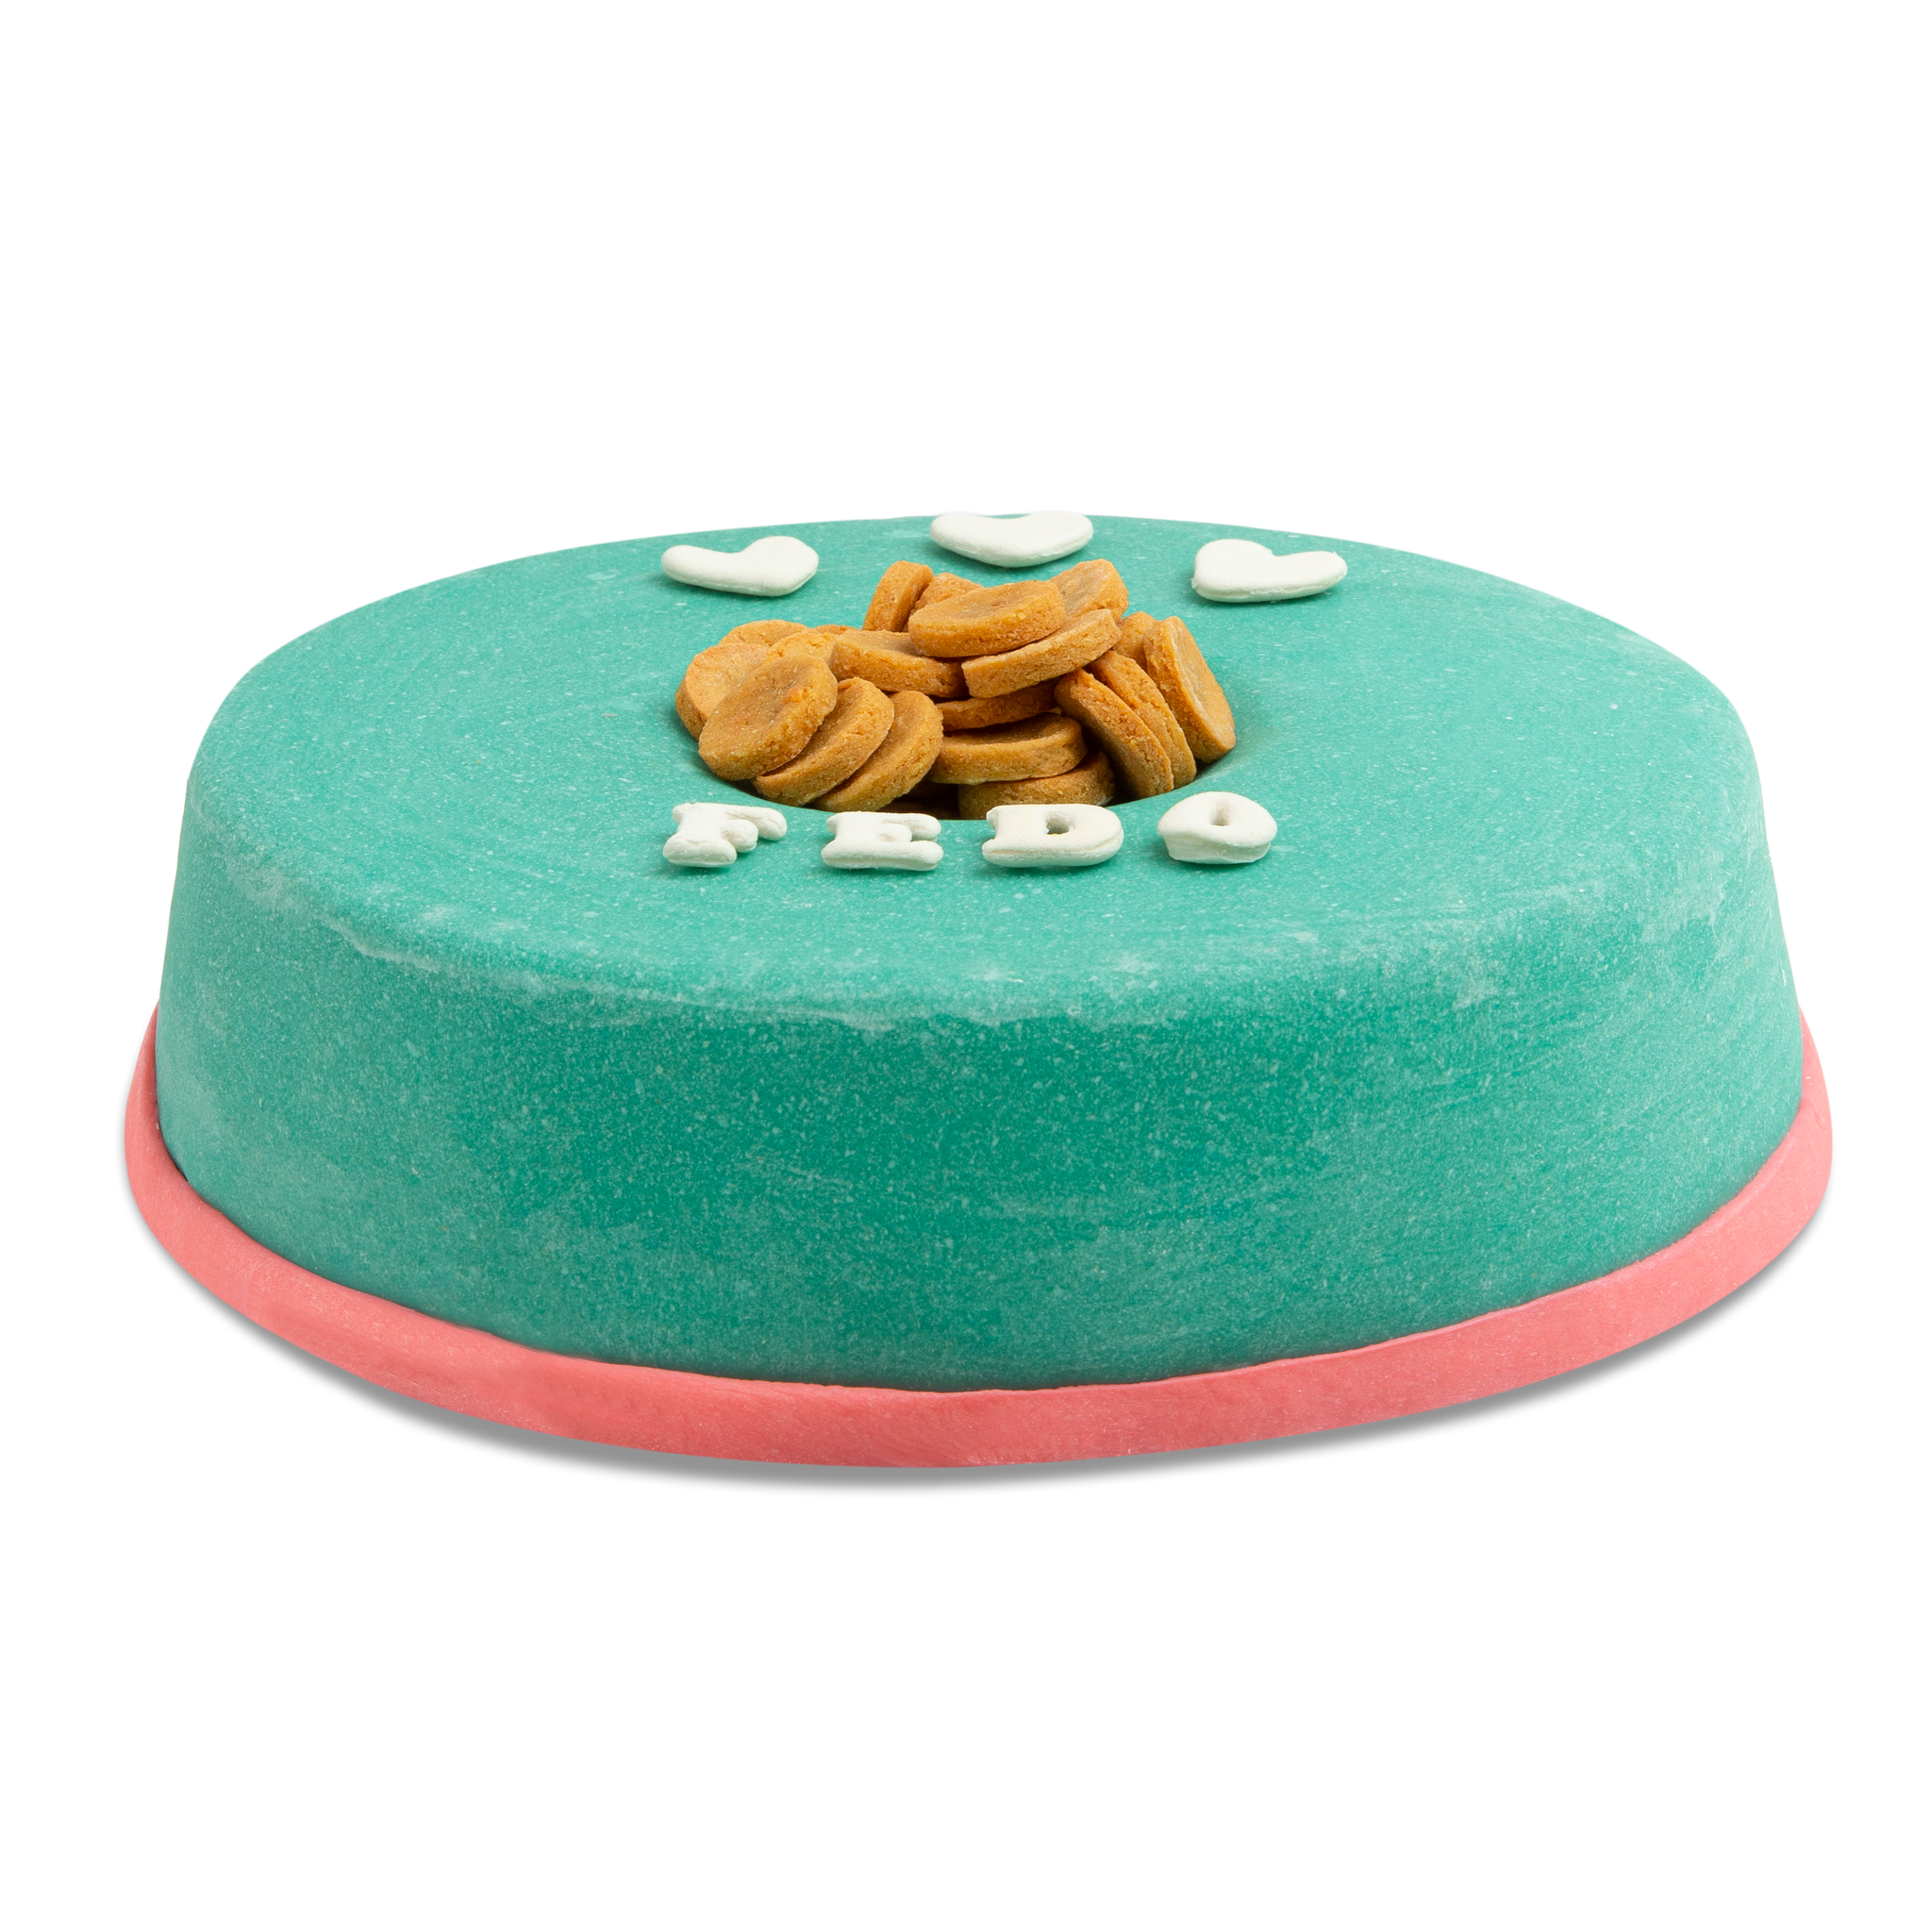 Doggy-Bowl Cake for Dogs (Green)